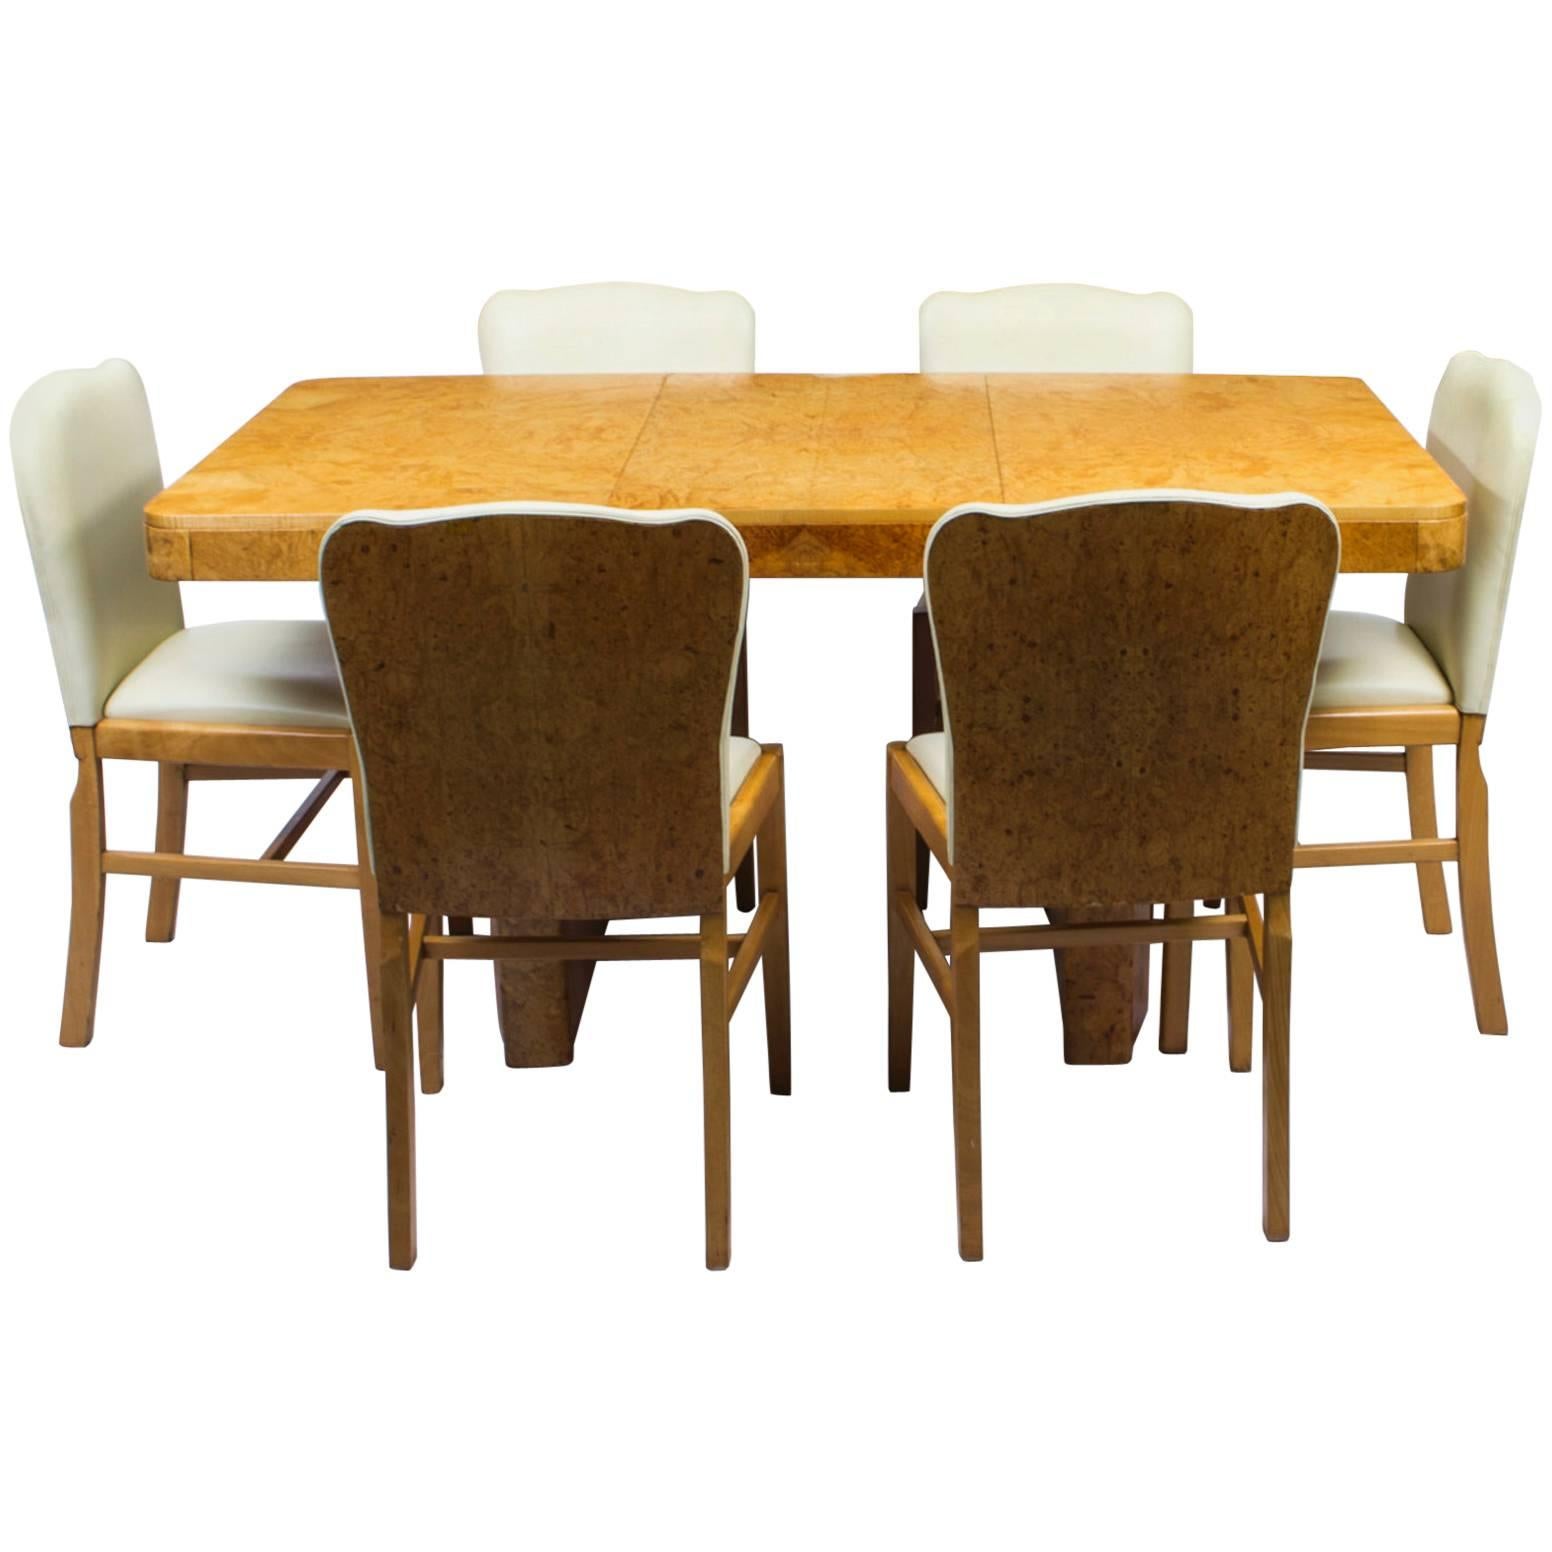 Antique Art Deco Bird's-Eye Maple Dining Table and Six Chairs